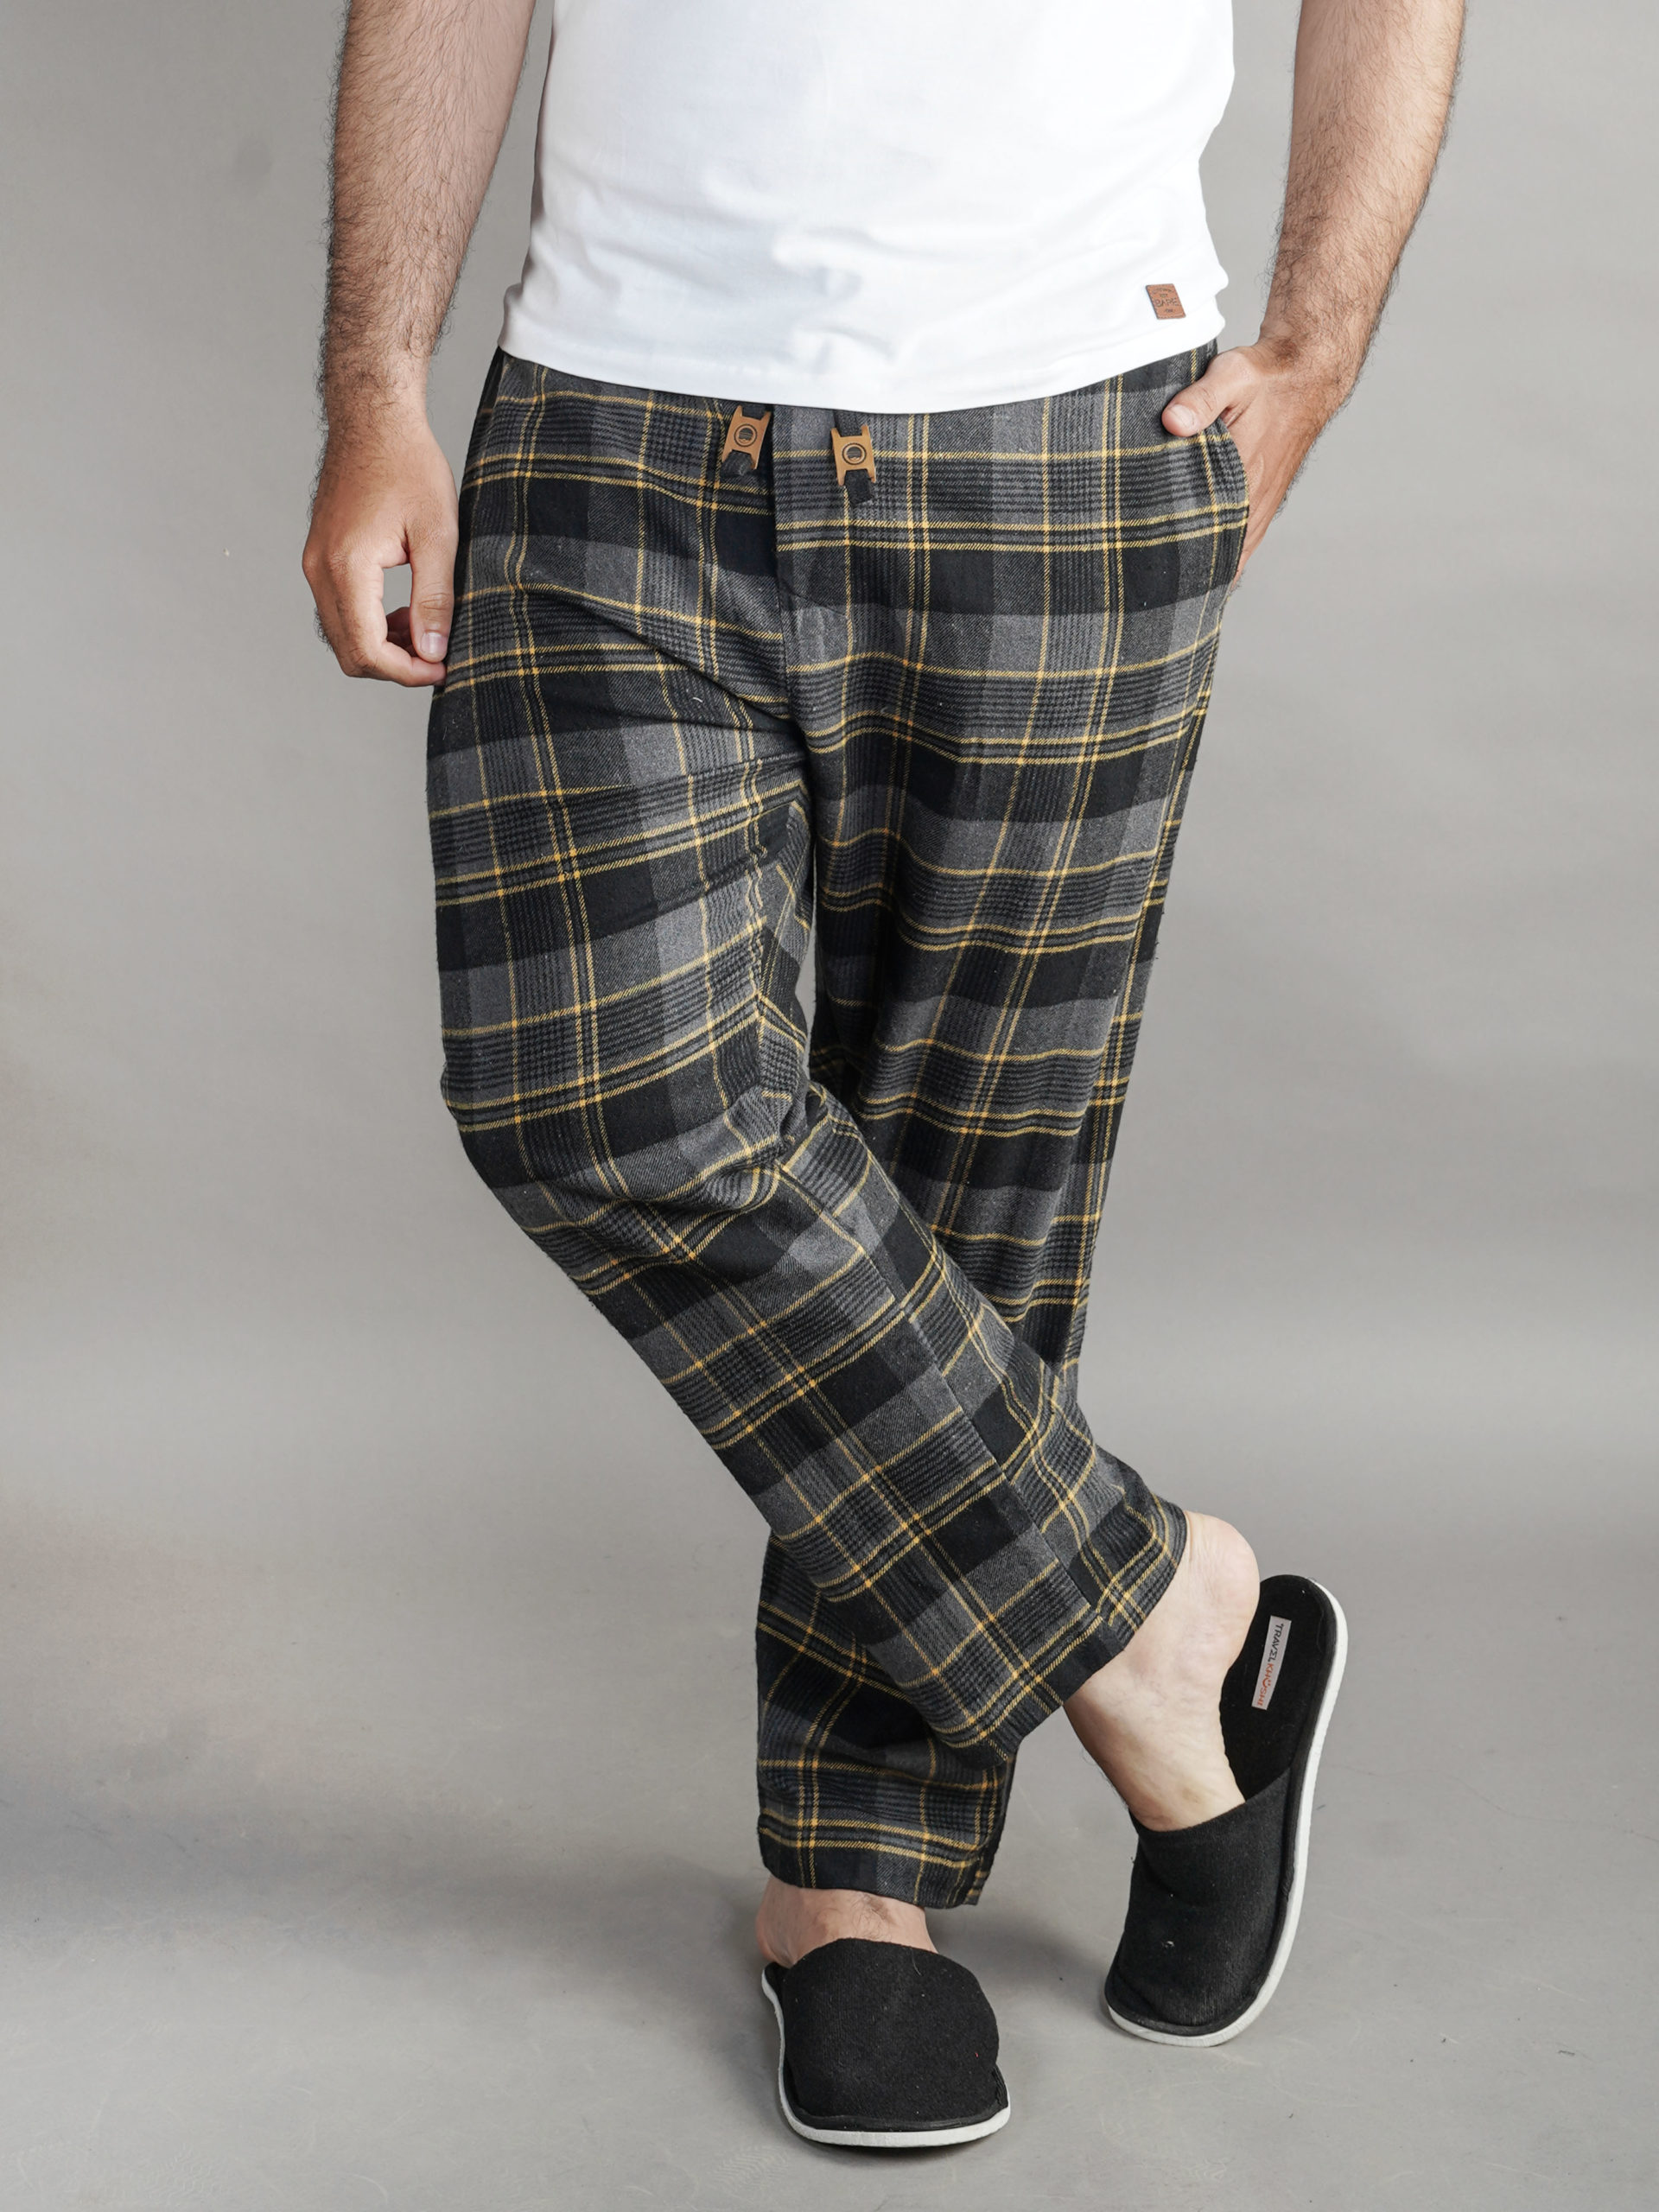 Yellow & Grey Checkered Flannel Pants For Men - Bombay Trooper